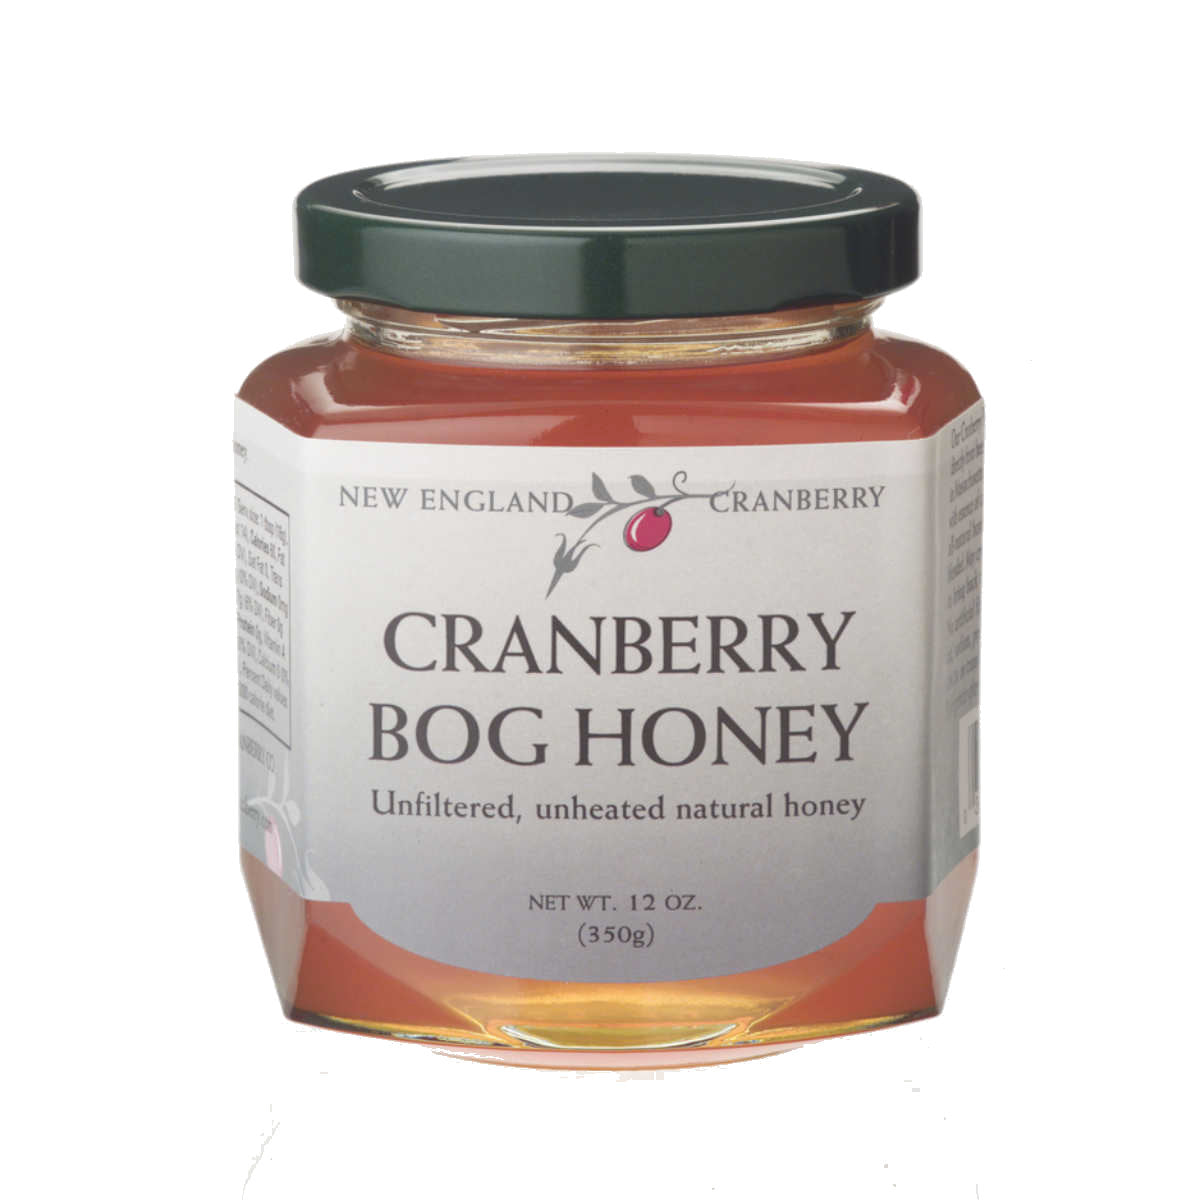 Bees make this delicious Cranberry Bog Honey by pollinating Cape Cod cranberry bogs, so you can add a touch of Cape Cod honey to your tea!